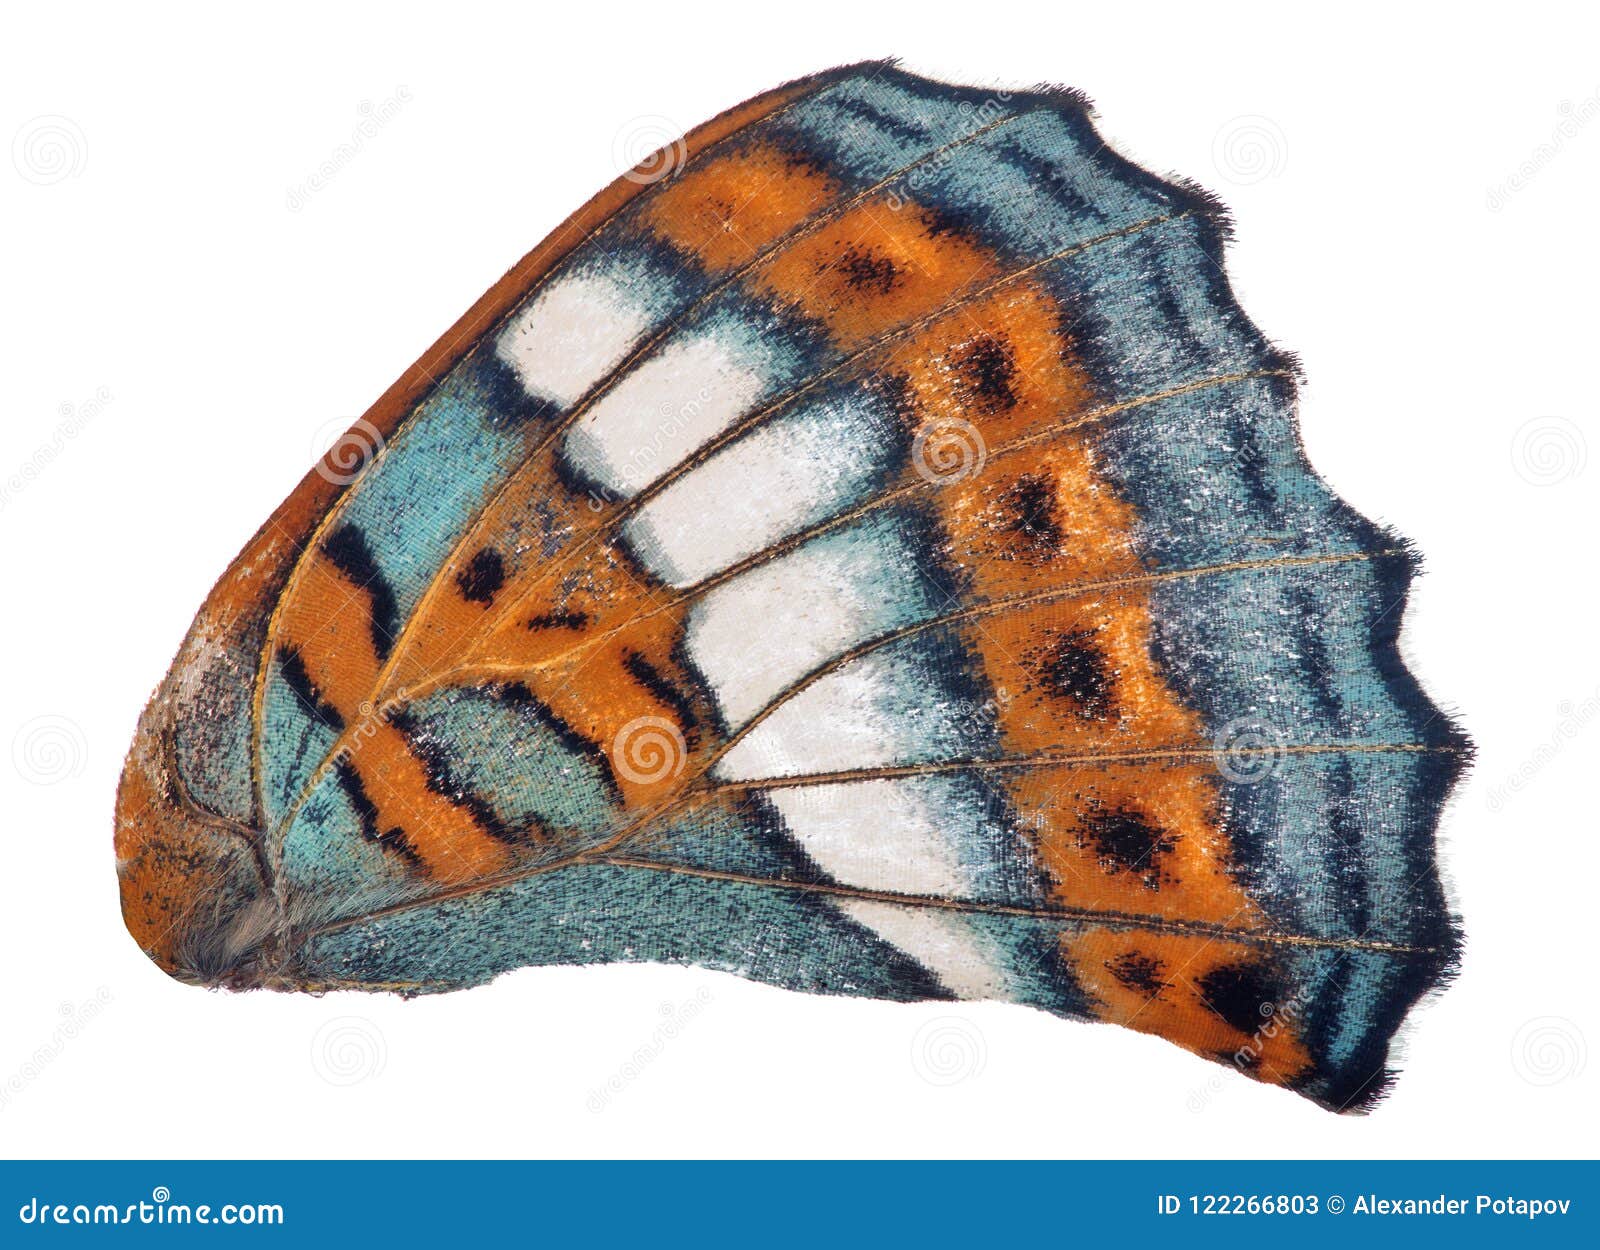 cyan and orange single butterfly wing on white